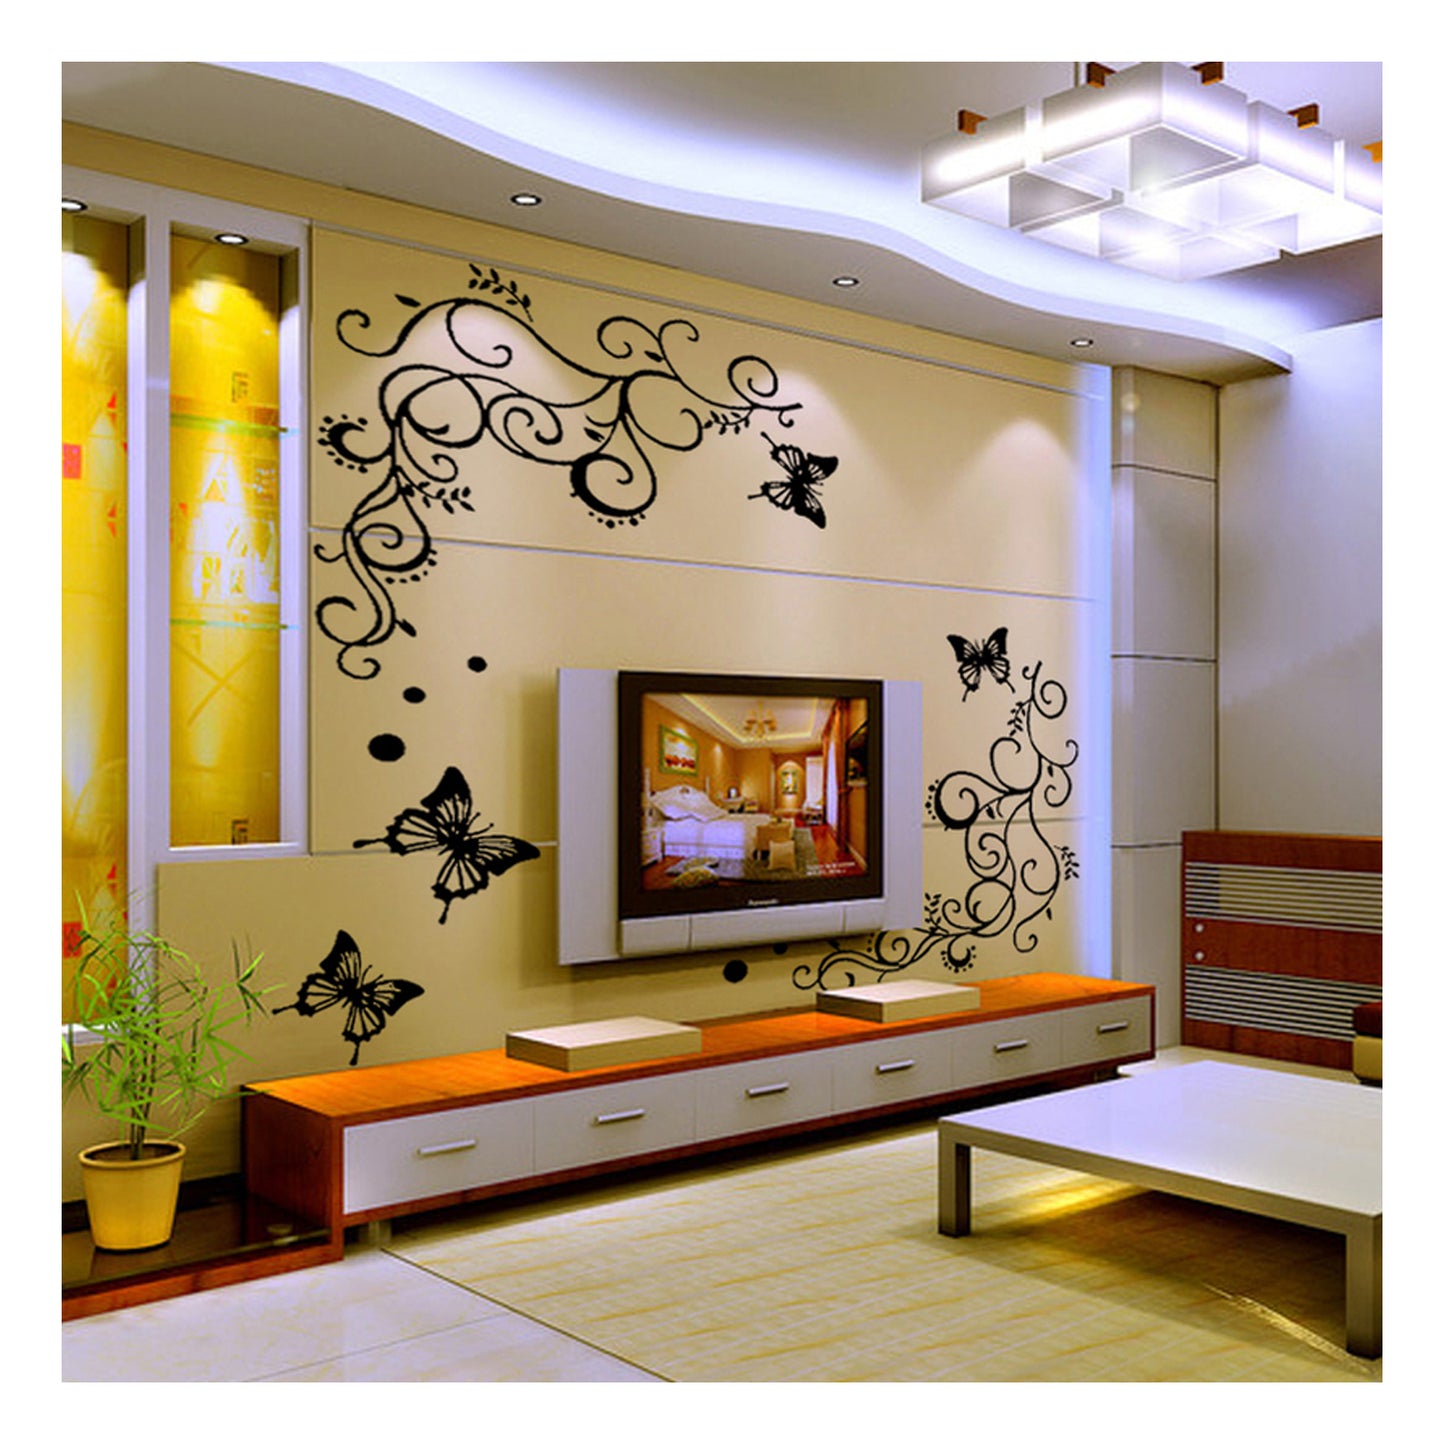 Spiral Design with Butterfly Wall Stencil (KHSNT361)